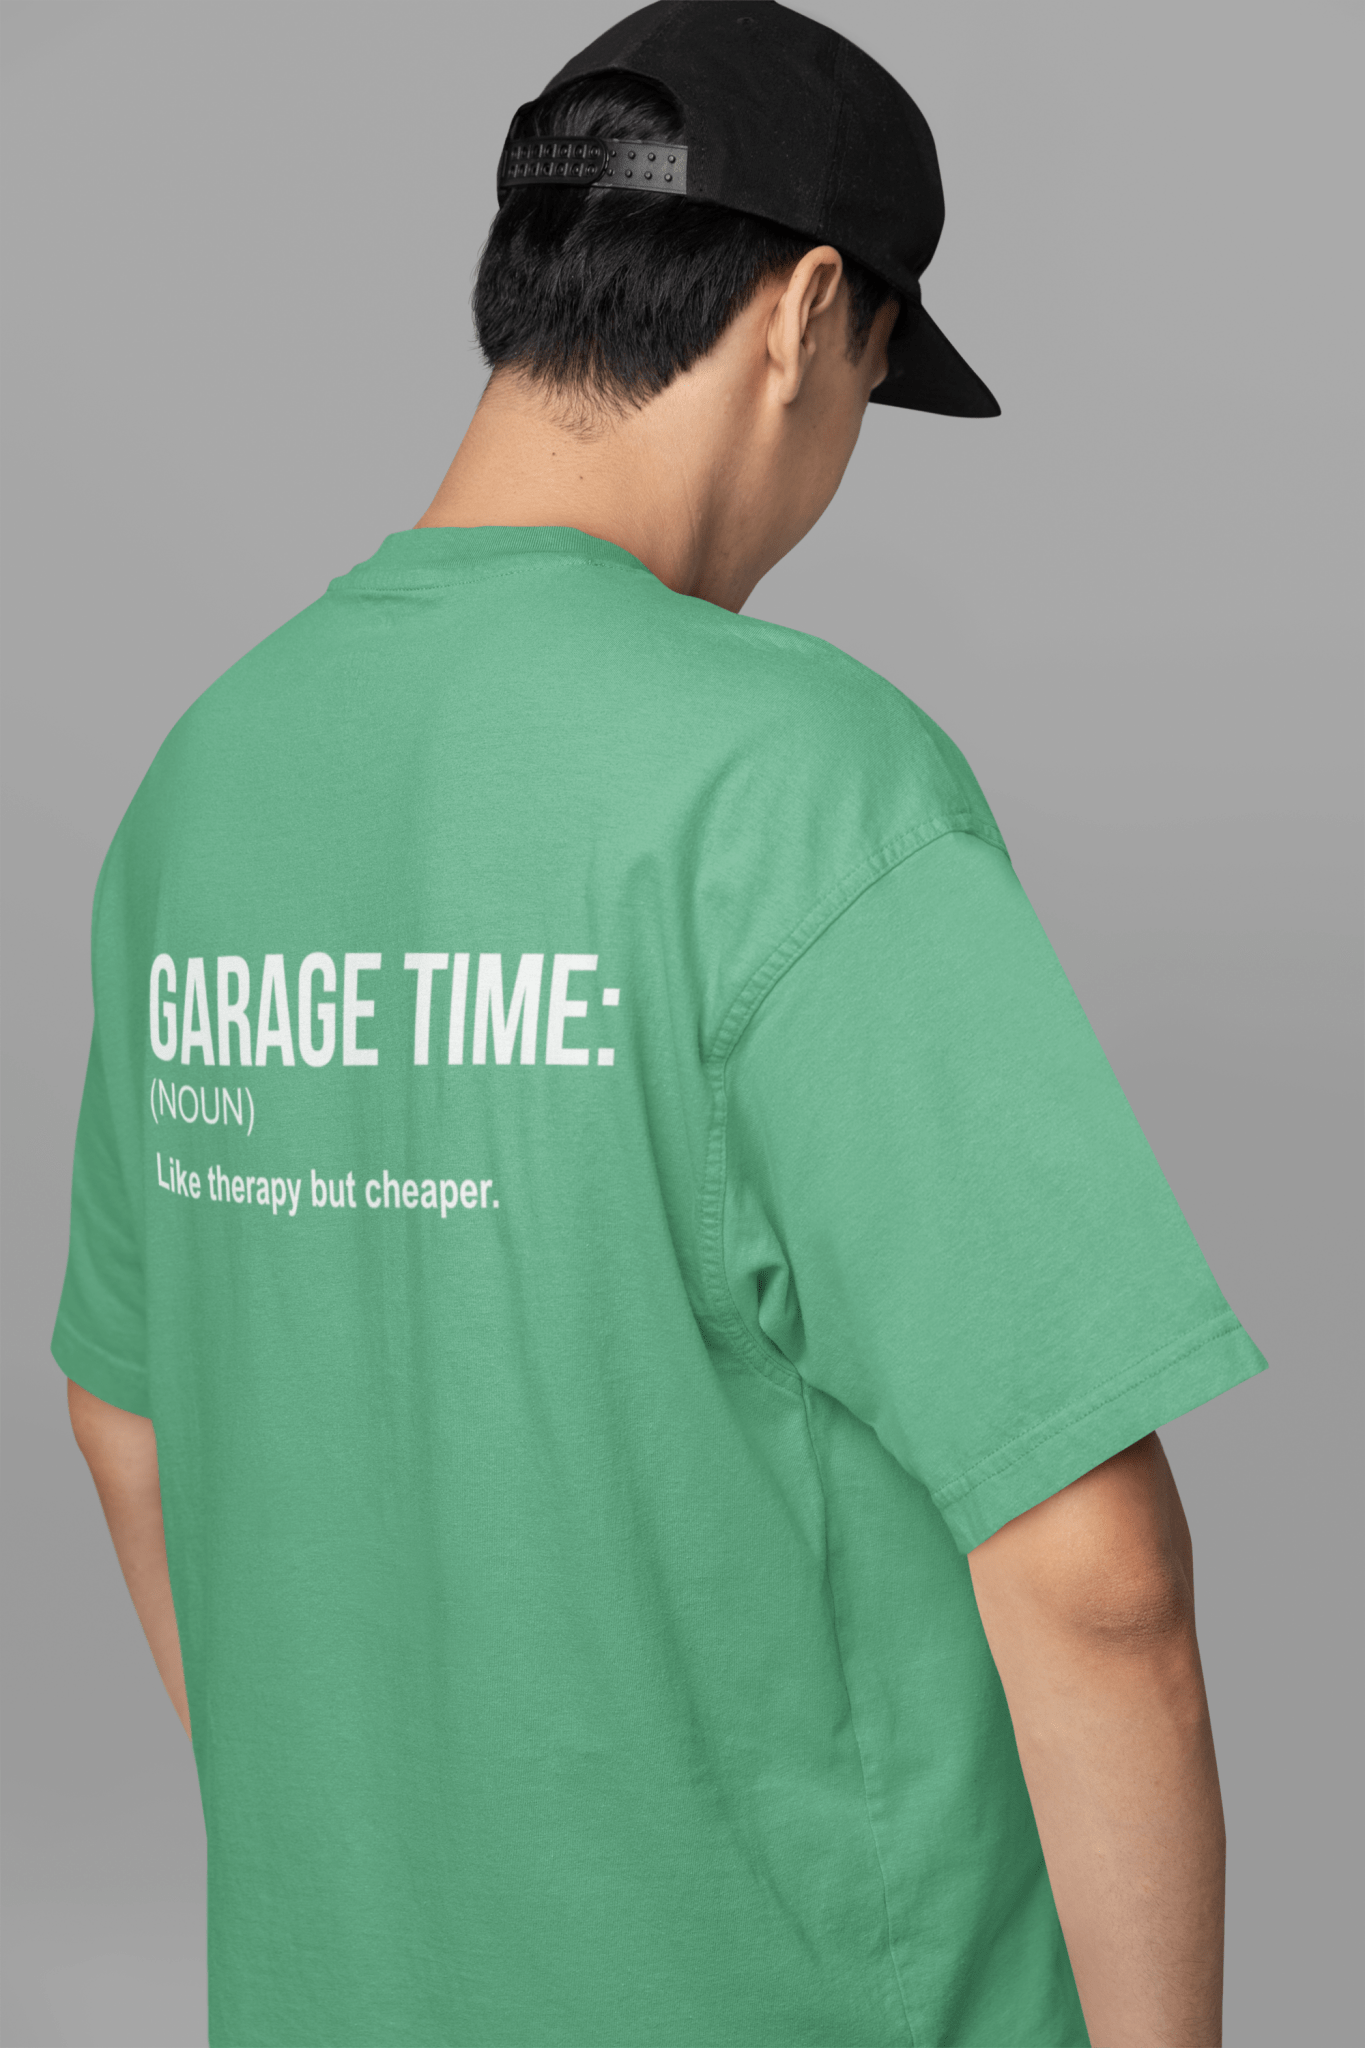 Garage Graphic Tees - Goats Trail Off-Road Apparel Company